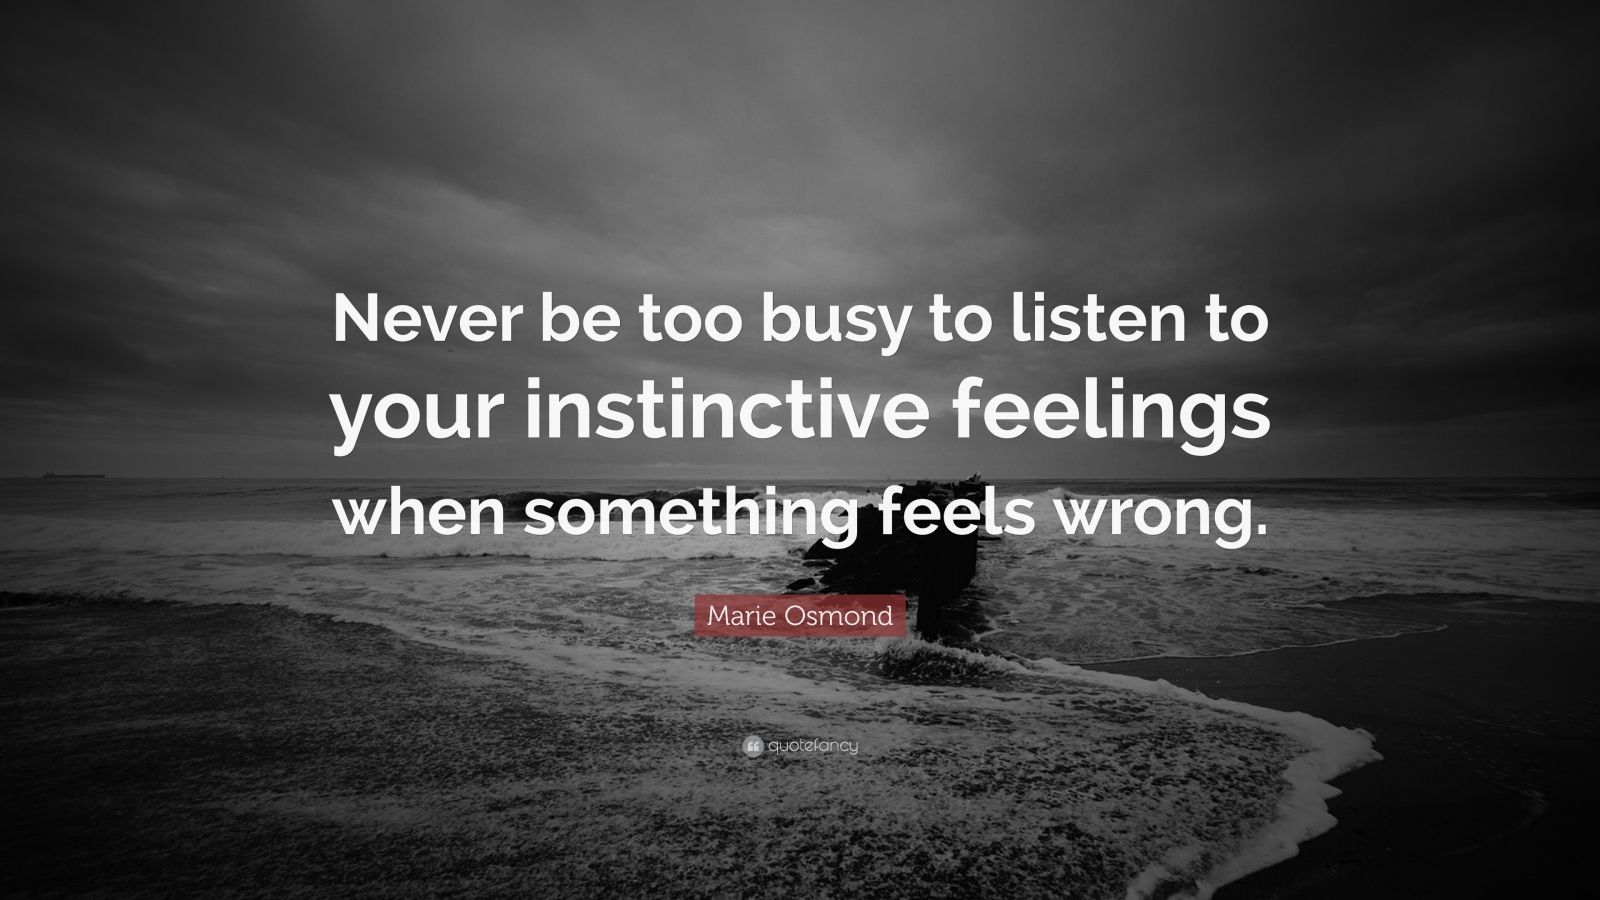 Marie Osmond Quote: “Never be too busy to listen to your instinctive ...